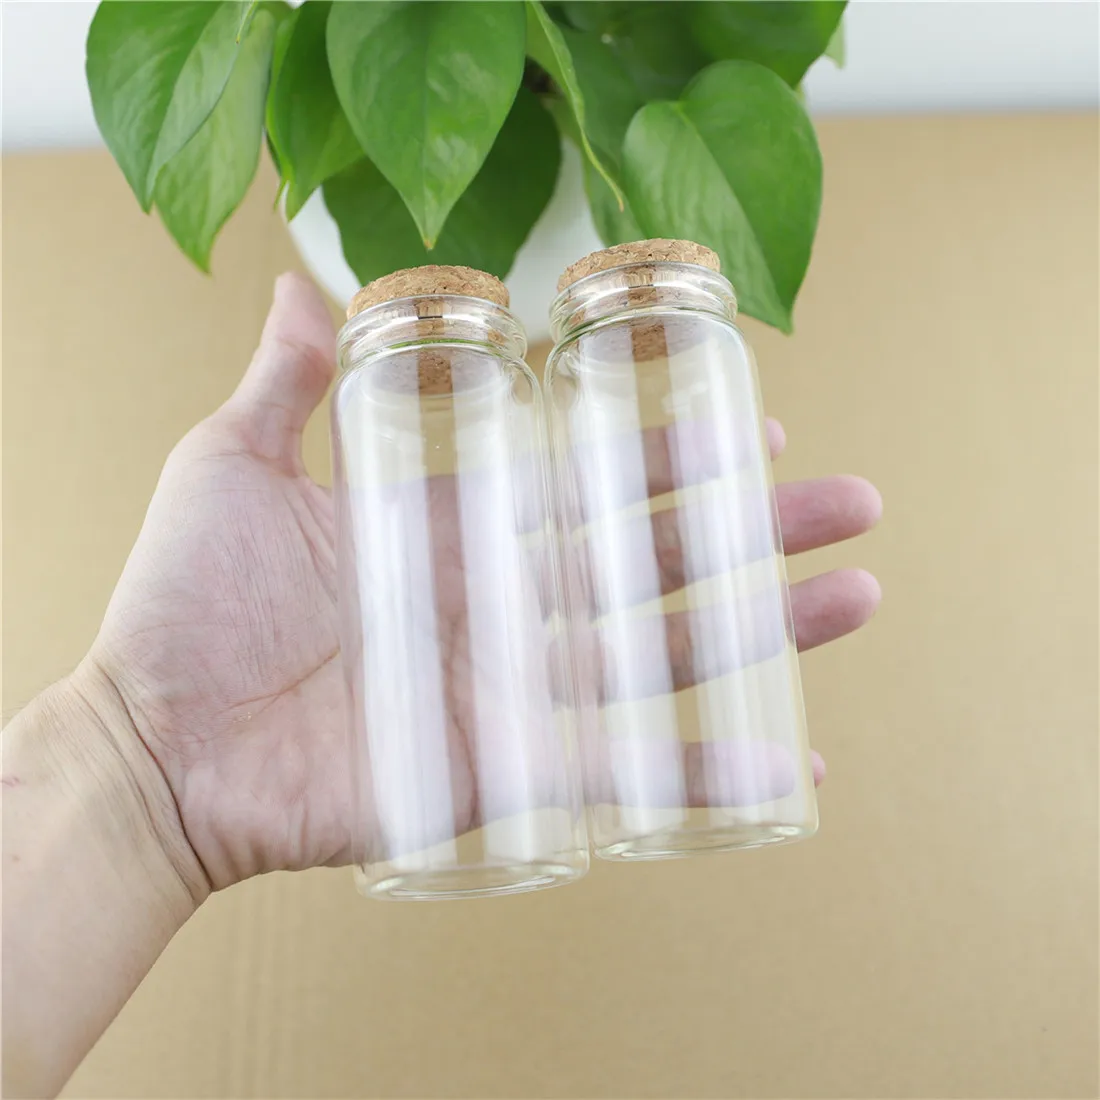 

6 Pcs/lot 47*120mm 150ml Glass Bottle Stopper Cork Small Glass Jars Spicy Storage Test Tube Container Spice Vials DIY Craft